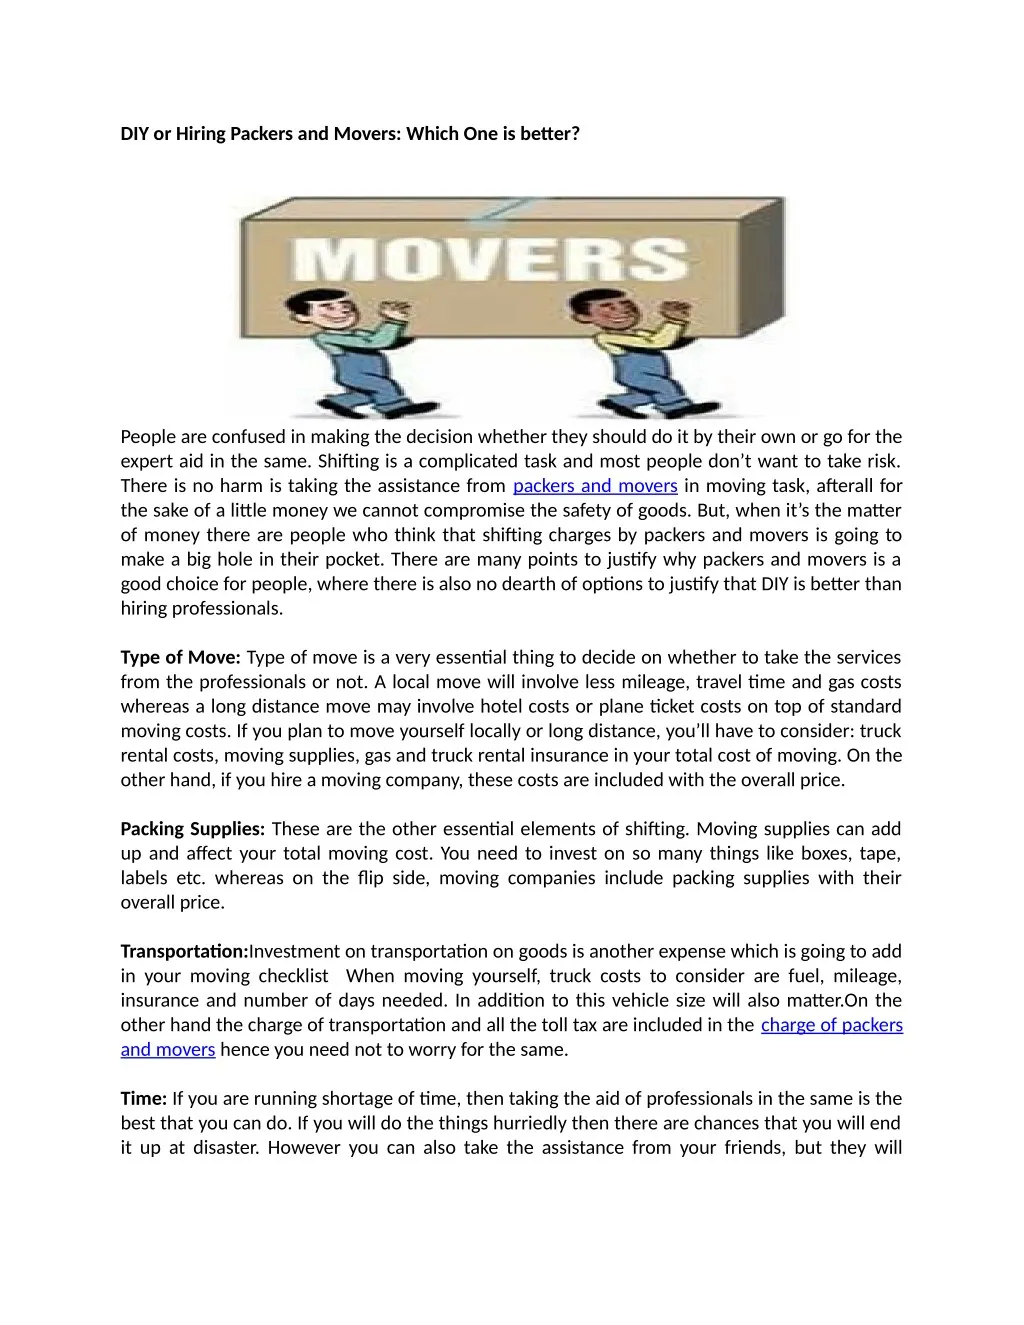 diy or hiring packers and movers which